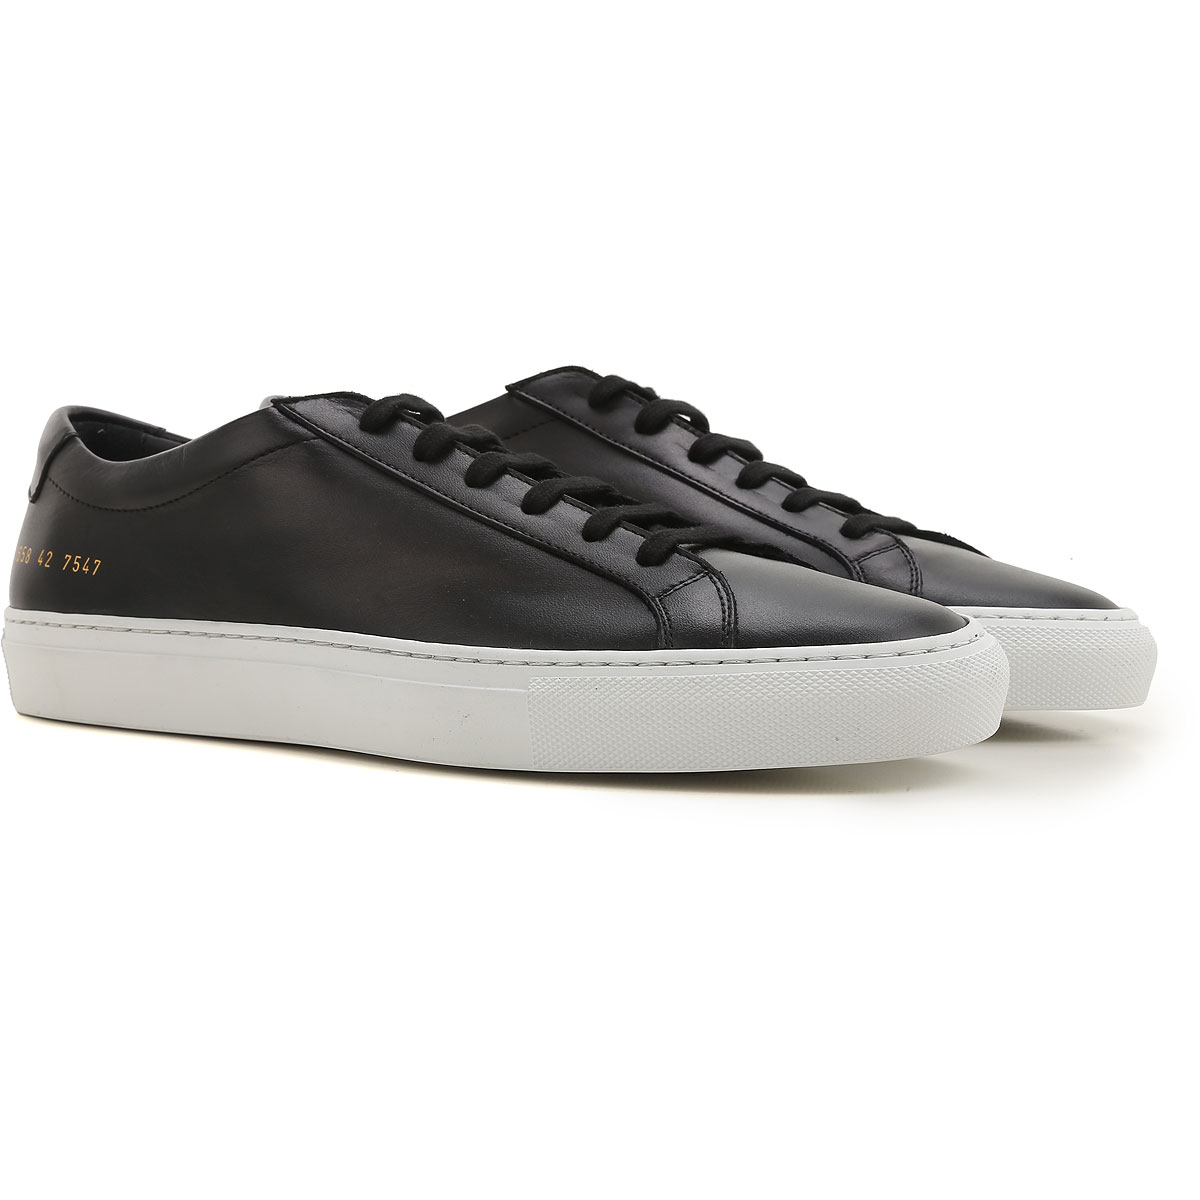 Mens Shoes Common Projects, Style code: 1658-7547-